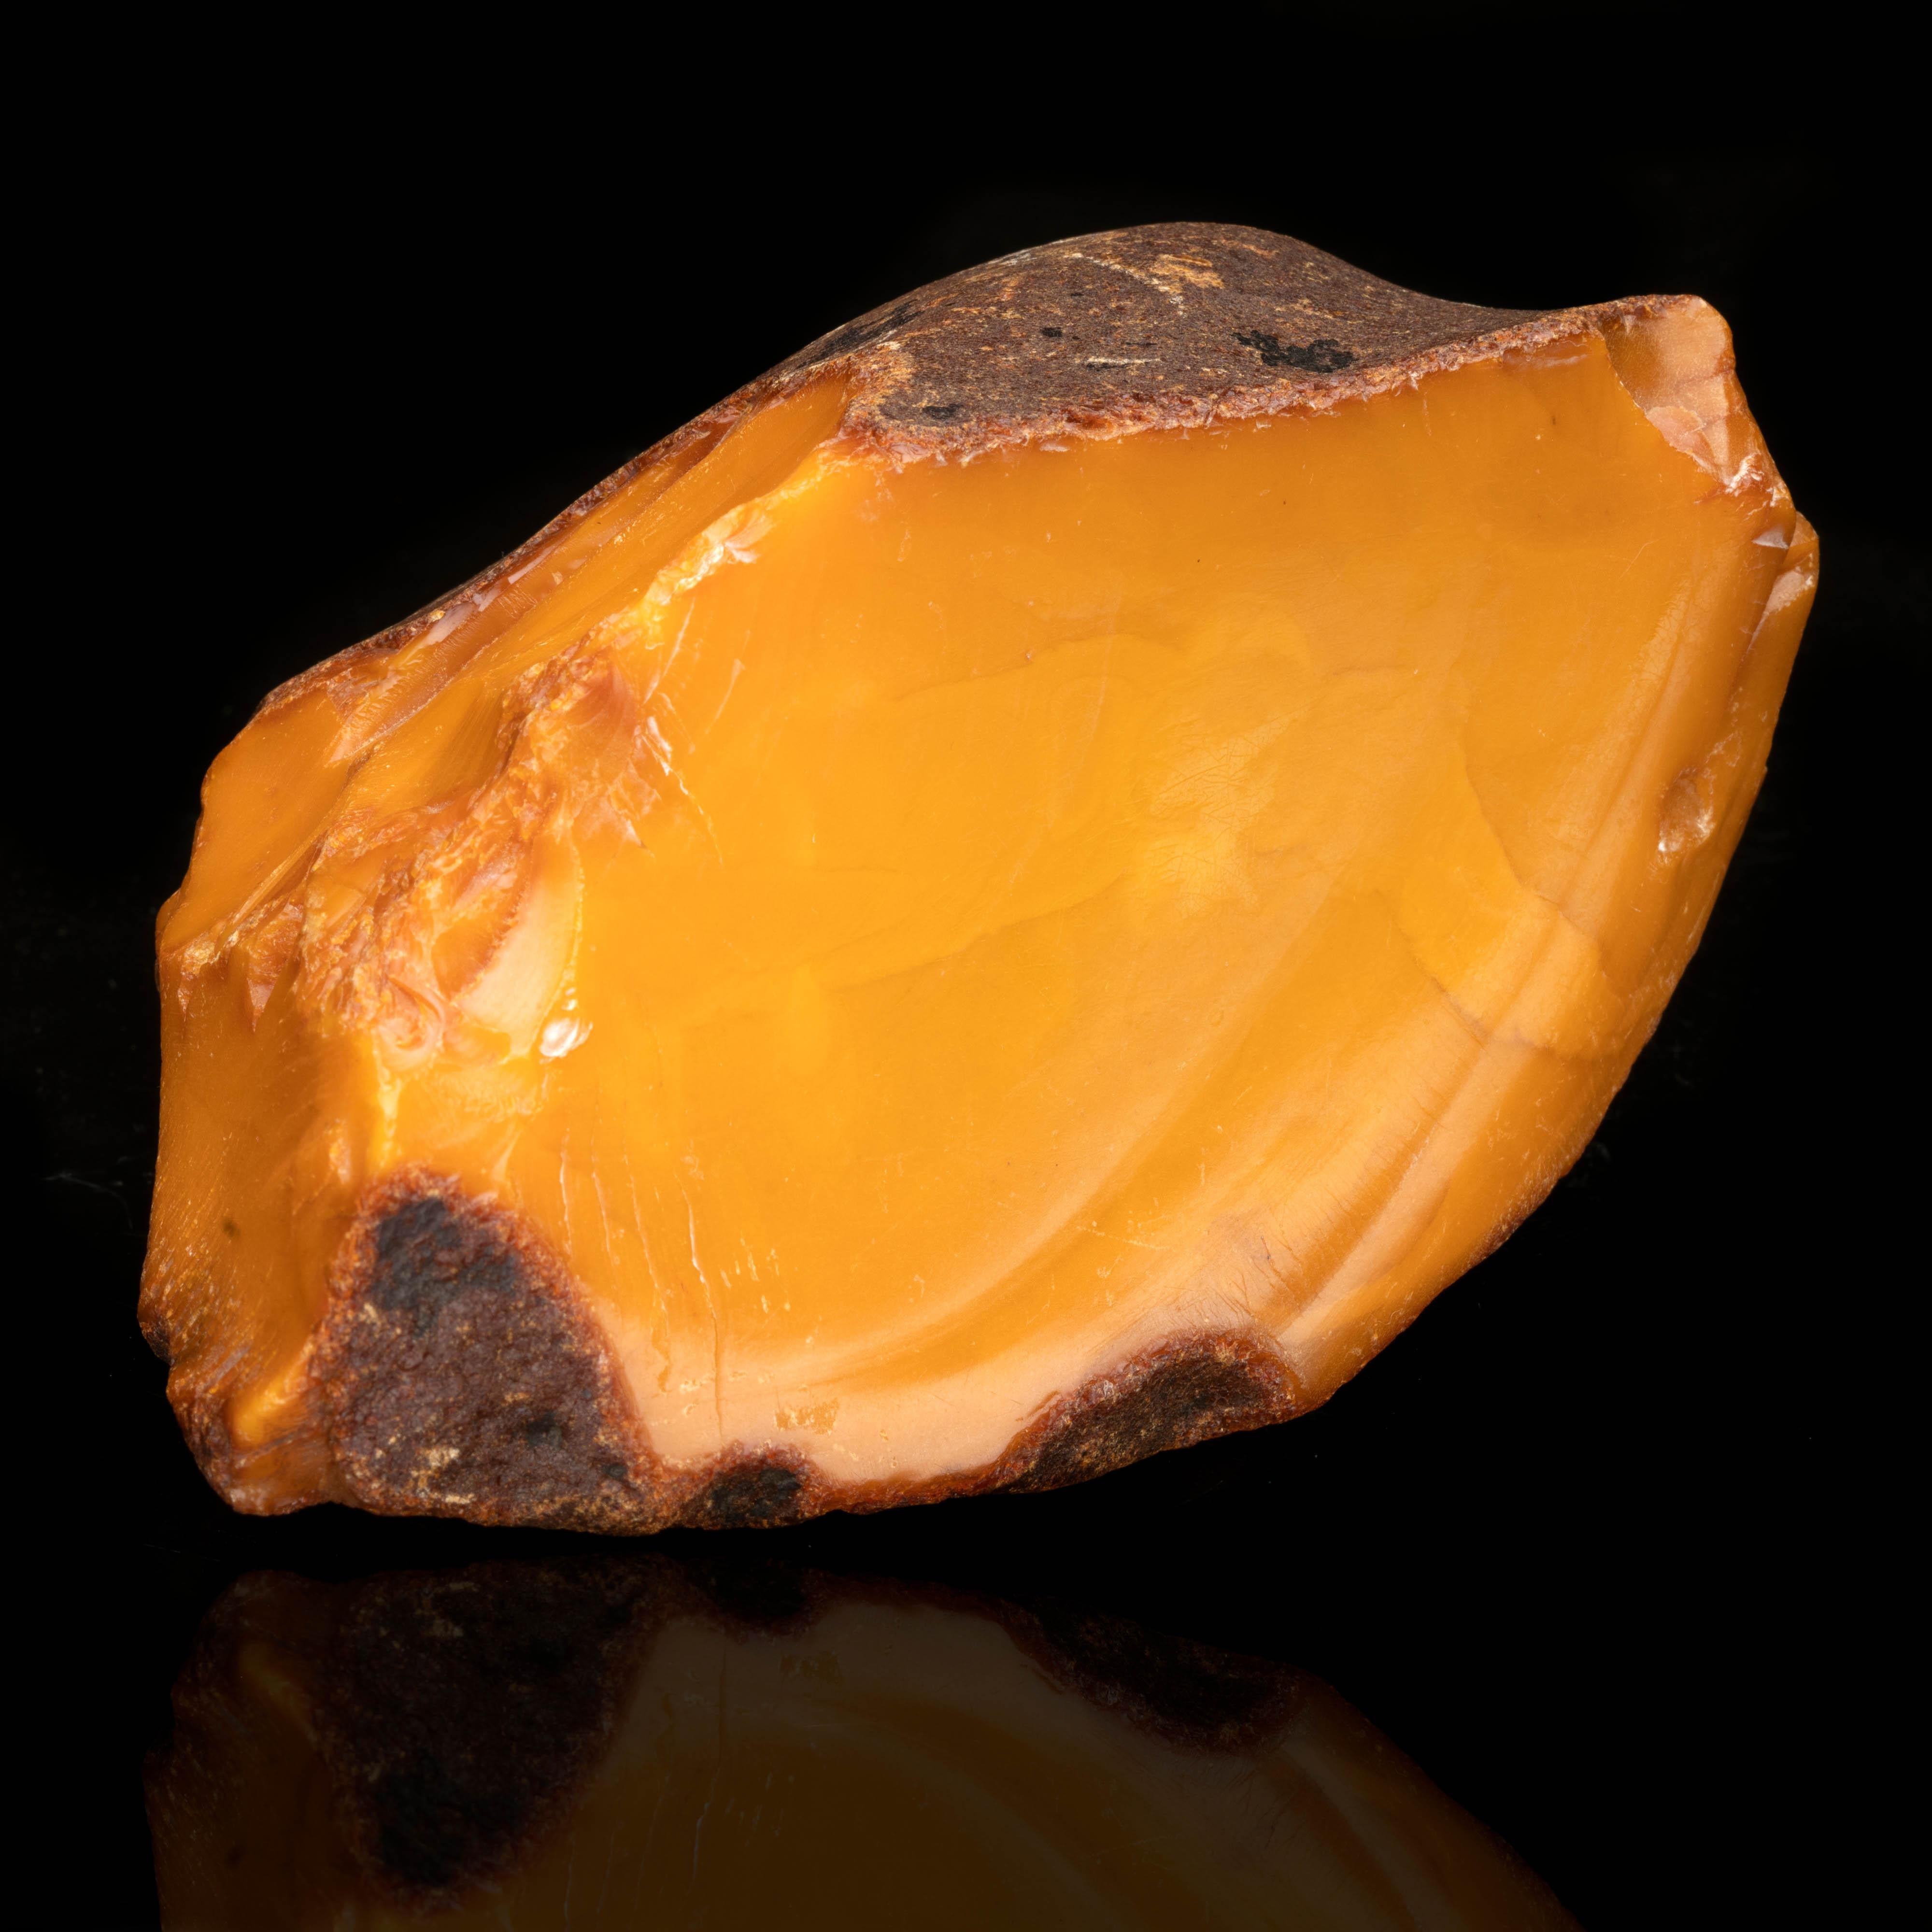 Dug in the 1980s, this sizable 385 gram specimen of genuine Baltic butterscotch amber gets its unique color or patina from 20-30 years' exposure to the elements. This weathering phenomenon is especially characteristic of Ukrainian amber. Most Baltic